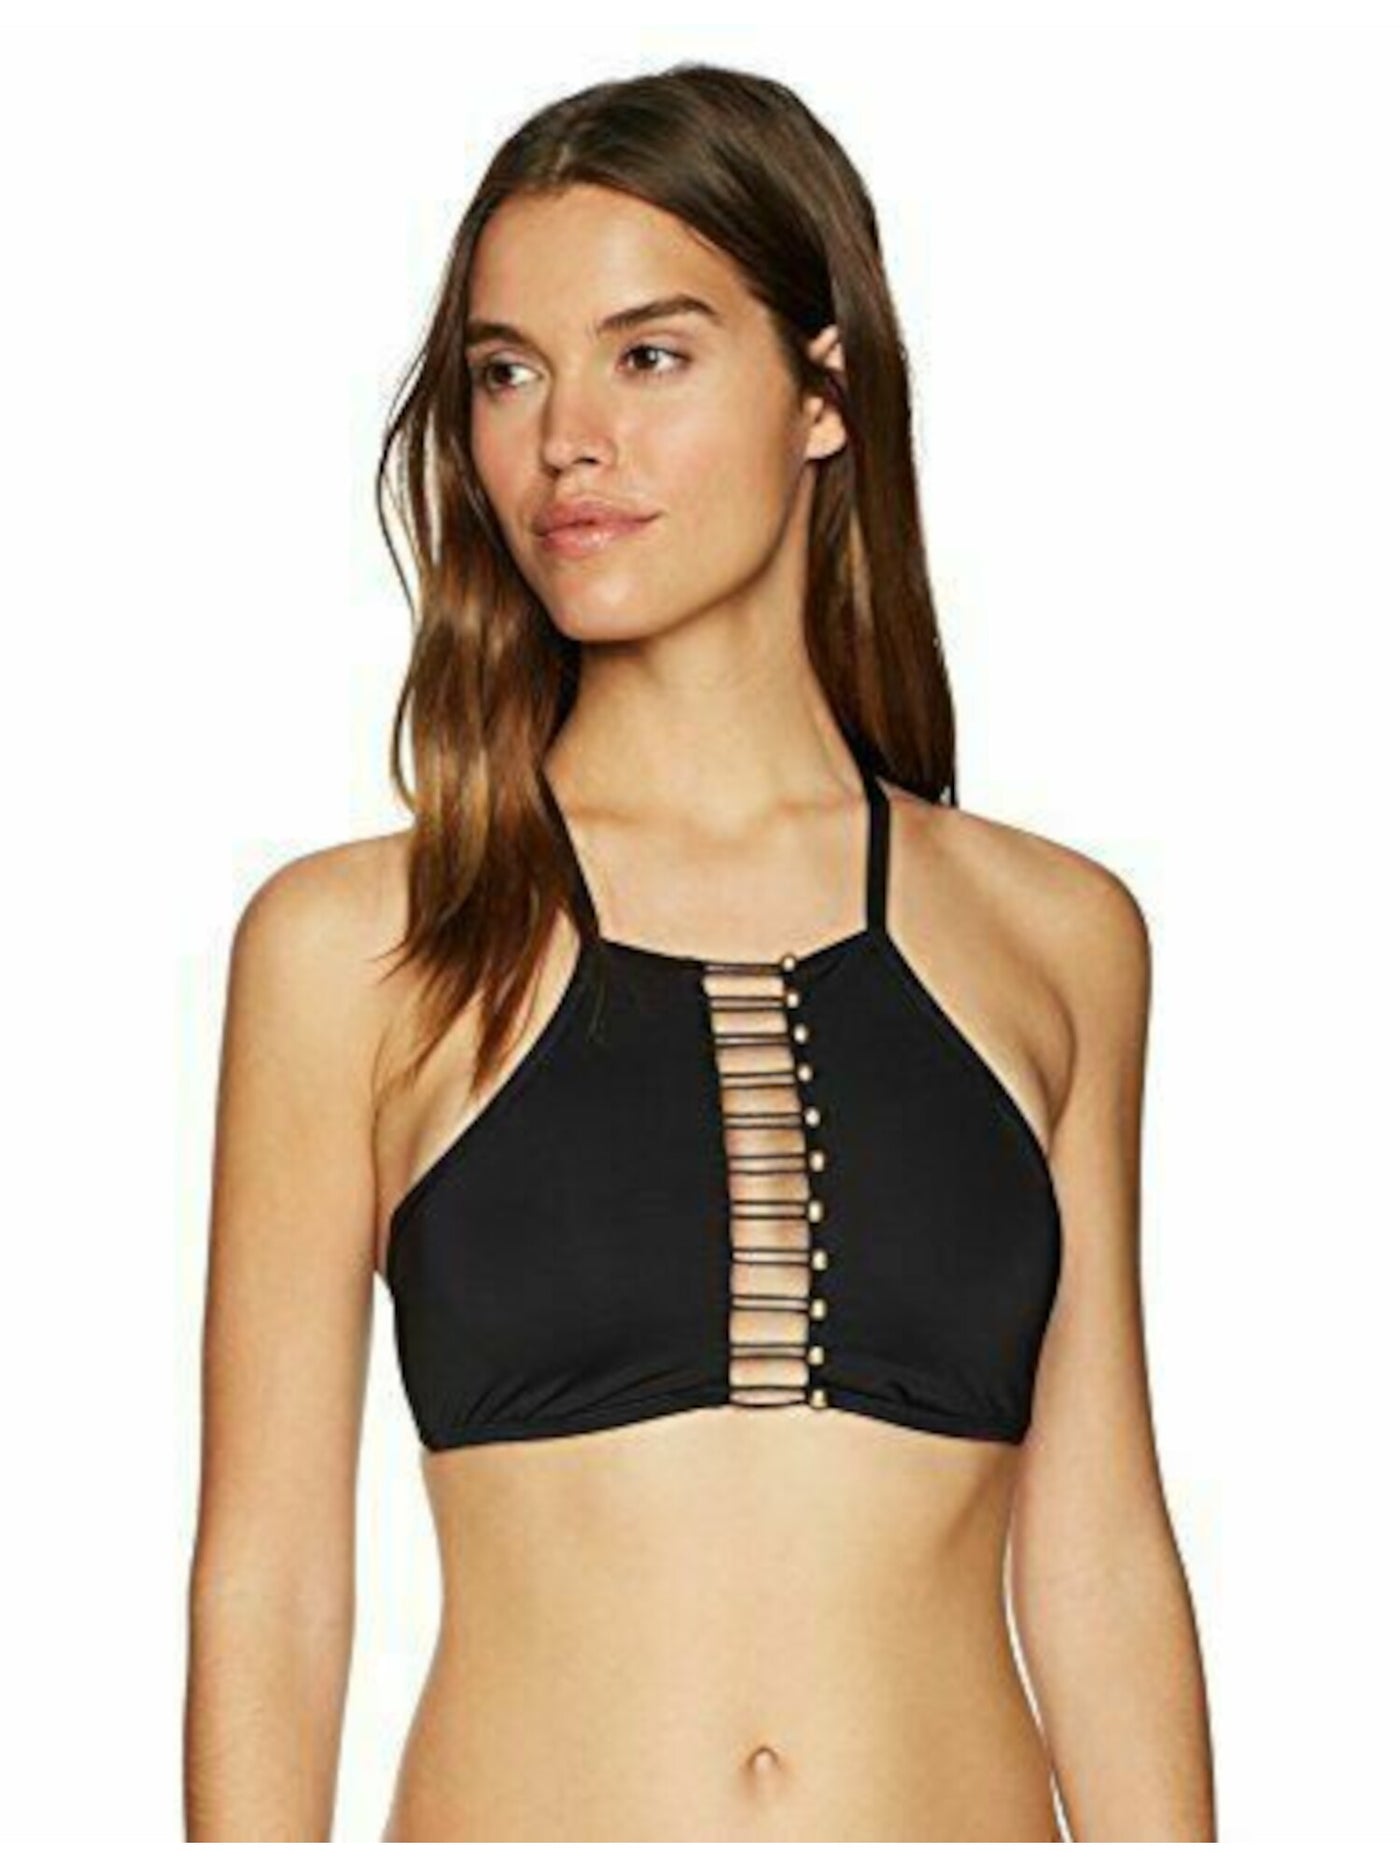 KENNETH COLE Women's Black Stretch Strappy Cutout New York High Neck Swimsuit Top S